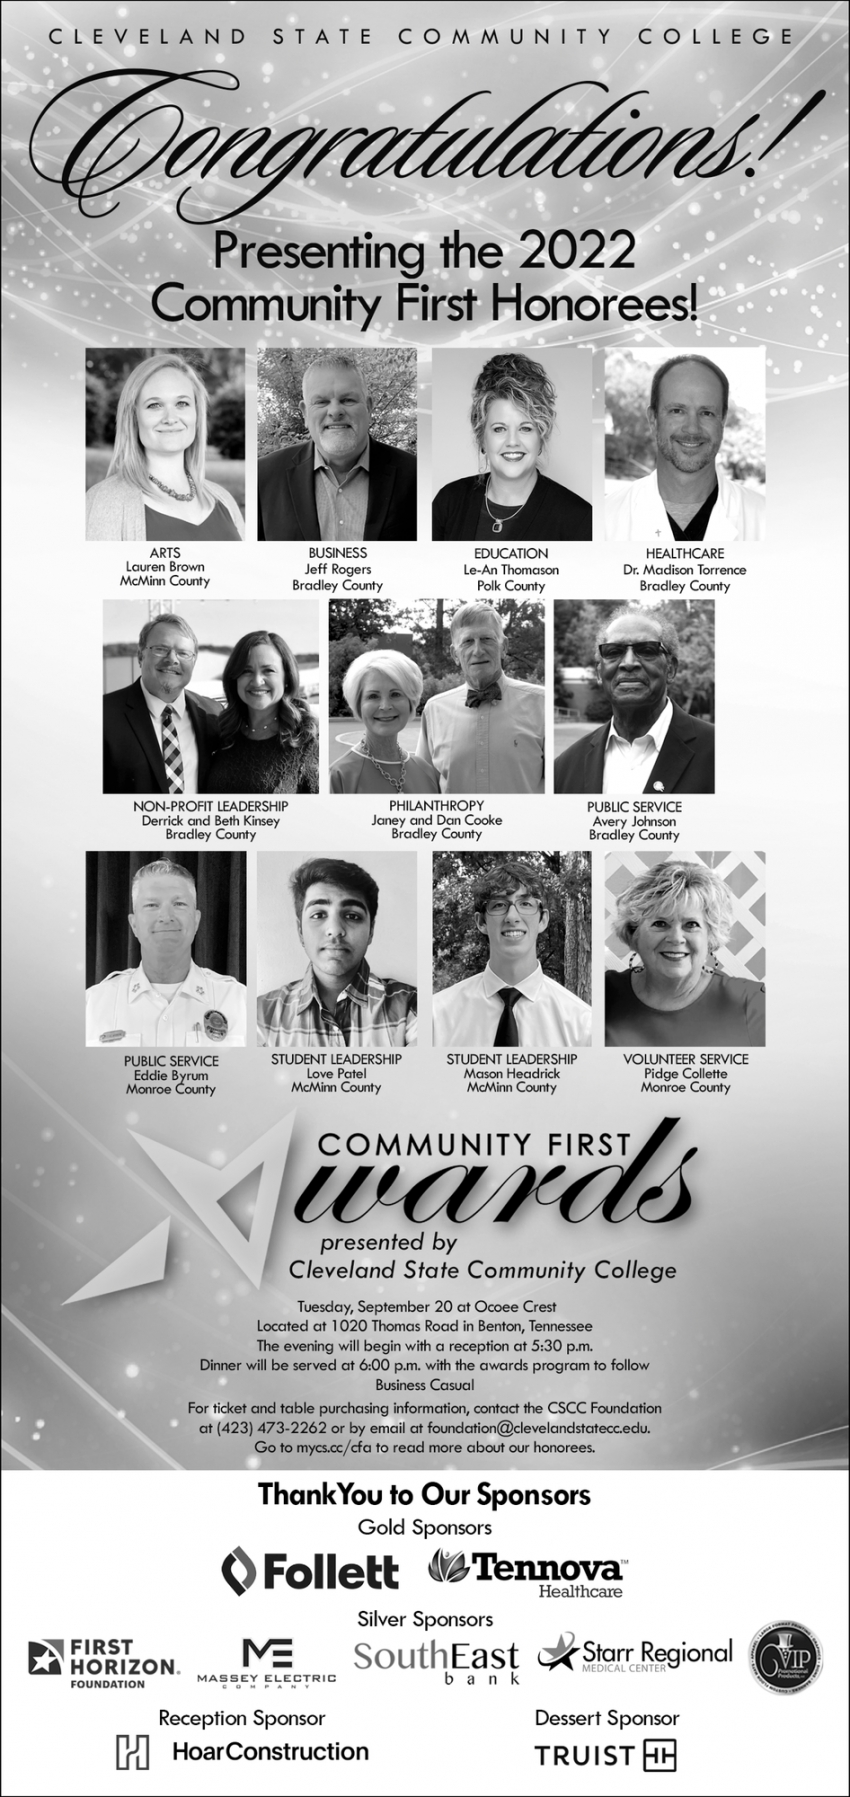 Presenting the 2022 Community First Honorees